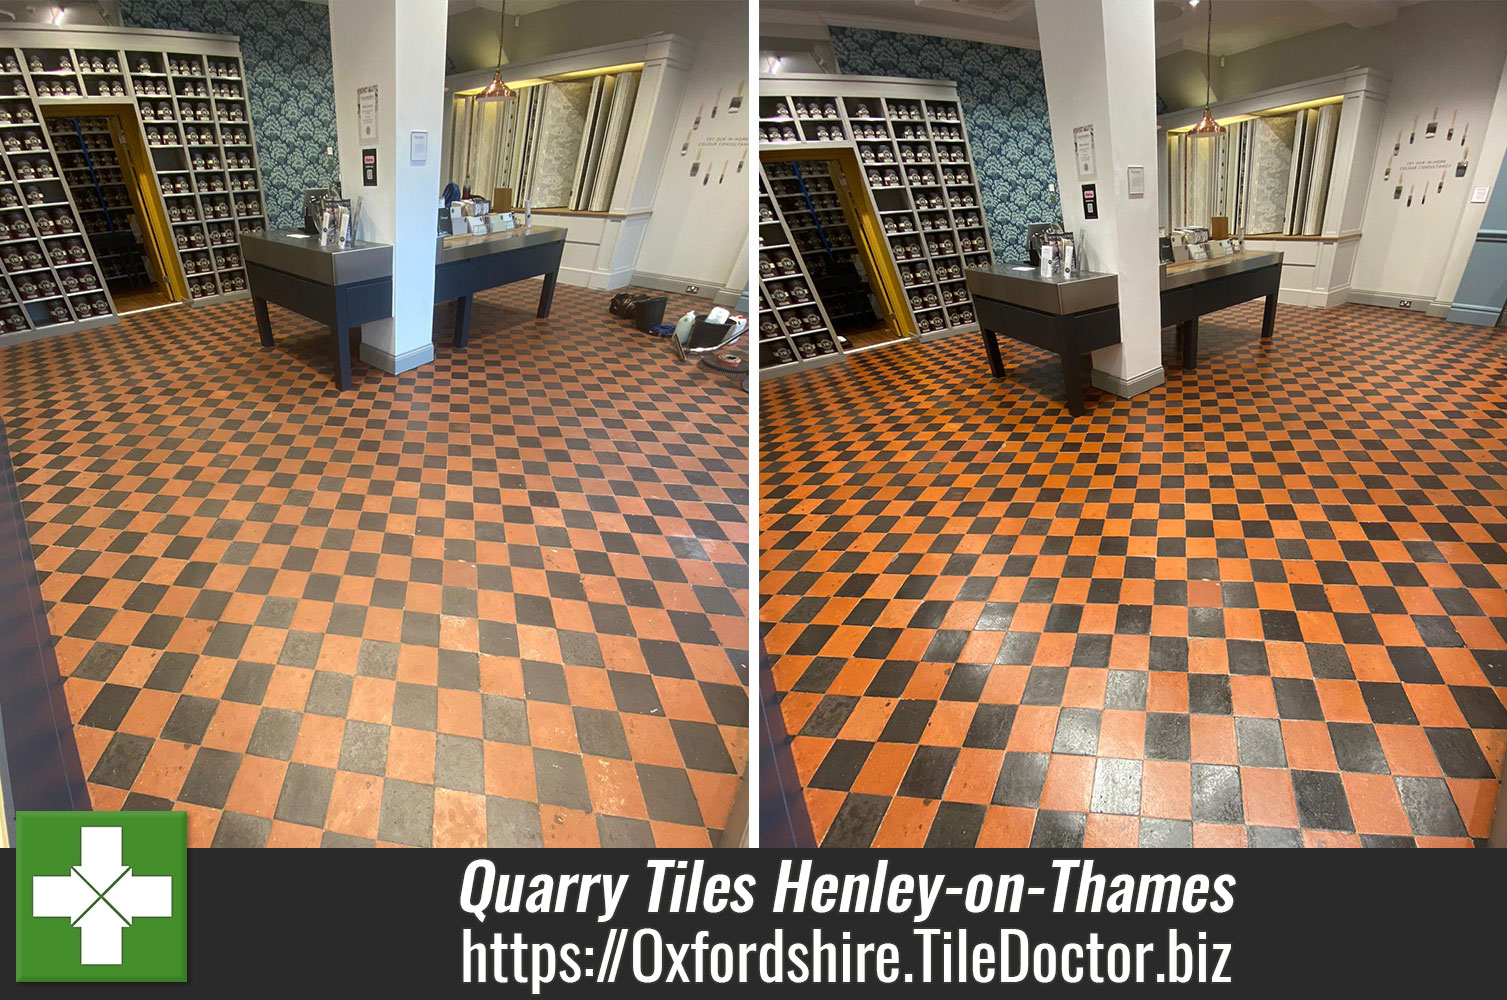 Deep Cleaning Quarry Tiles with Tile Doctor Pro-Clean in Henley-on-Thames Oxfordshire